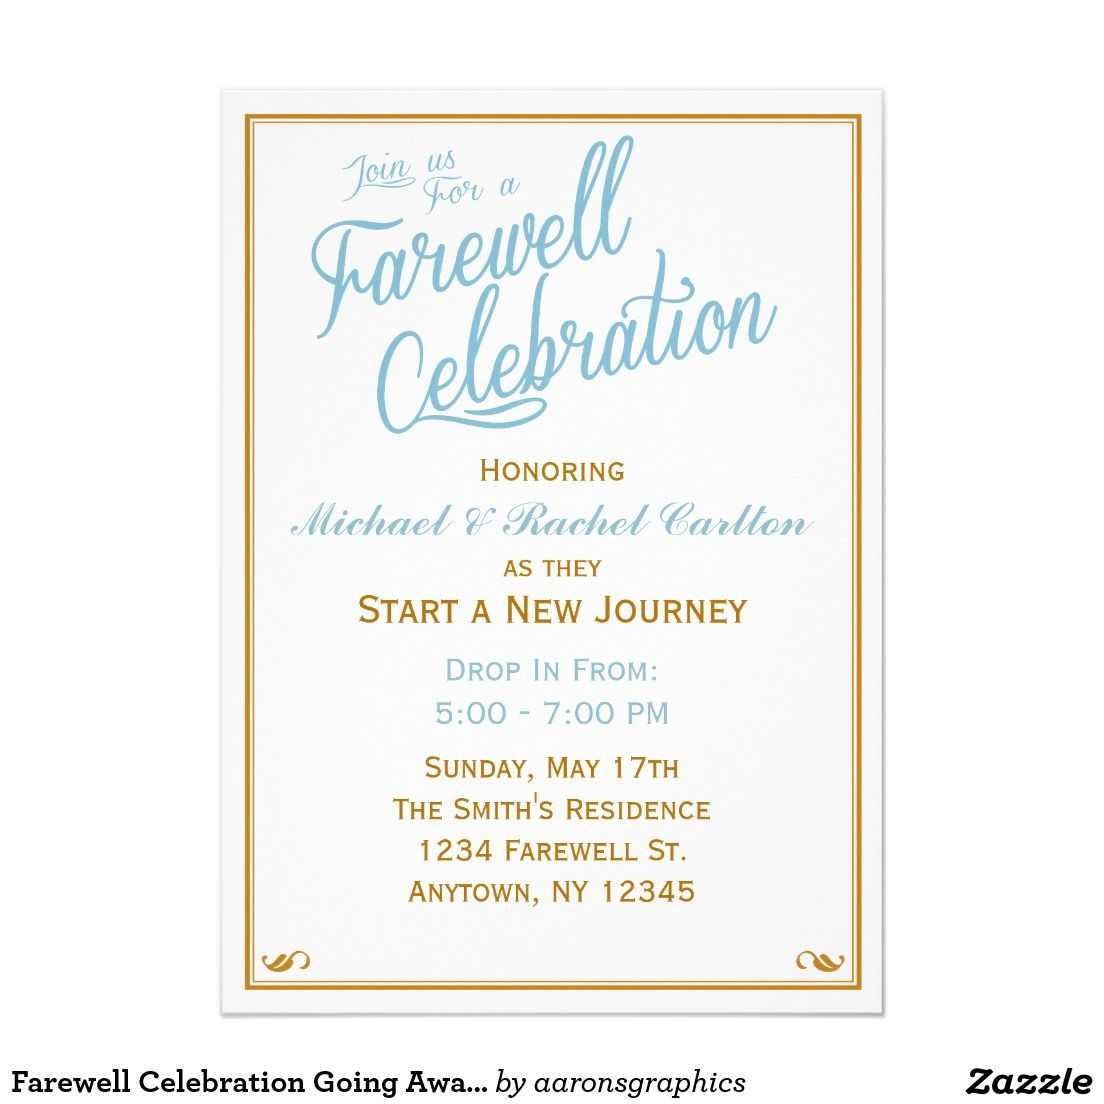 Farewell Celebration Going Away Invitation Zazzle Event throughout dimensions 1104 X 1104